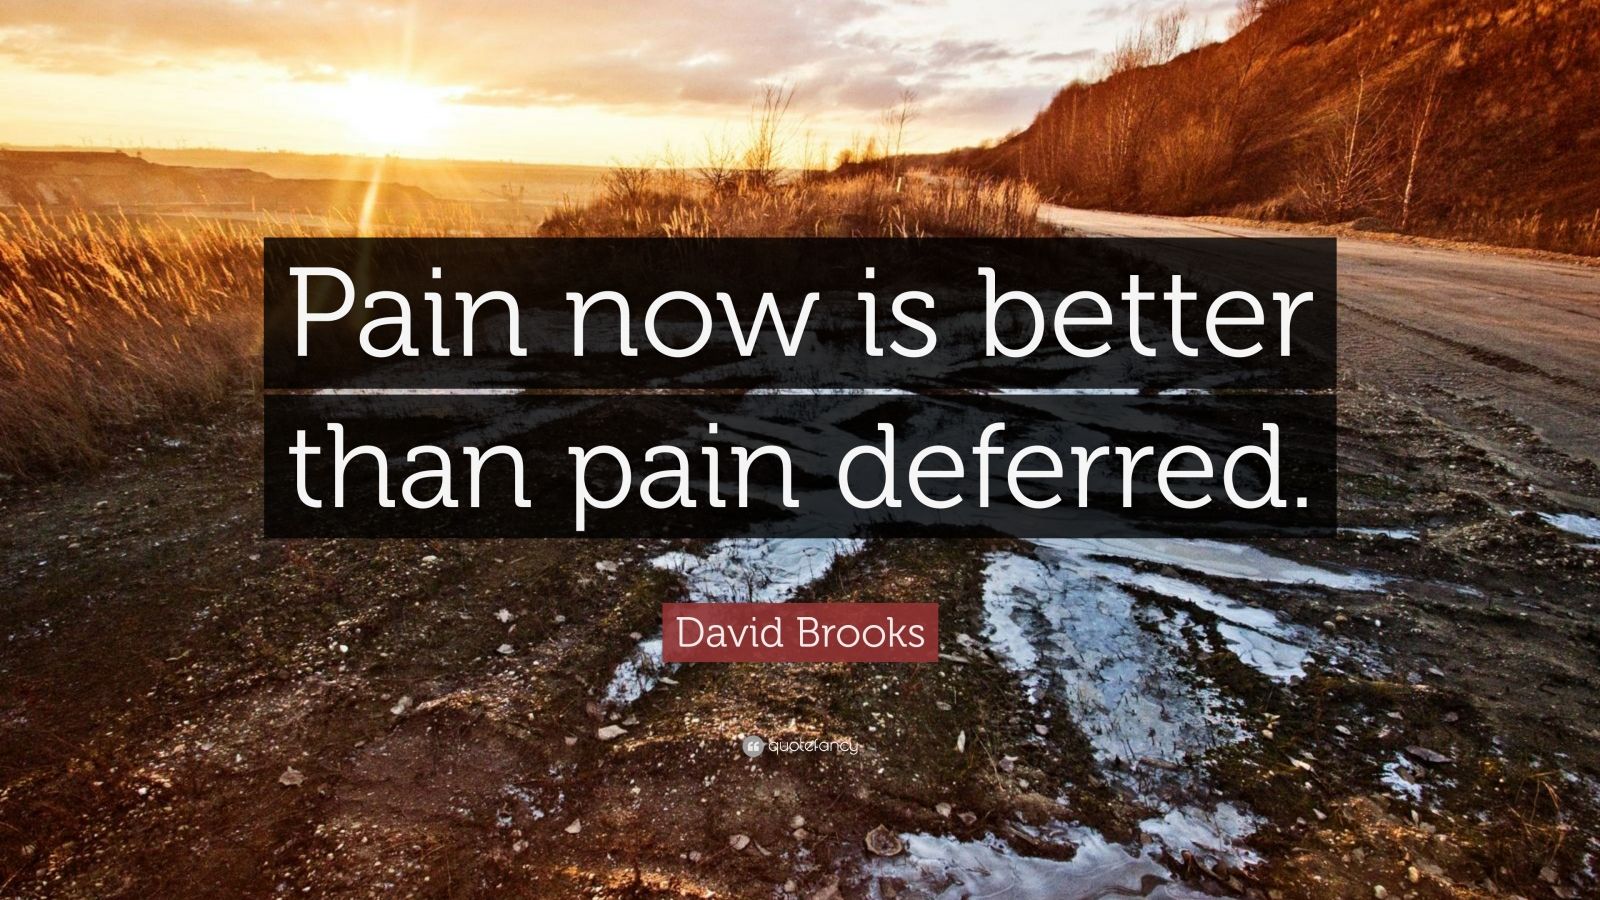 David Brooks Quote: “Pain now is better than pain deferred.”